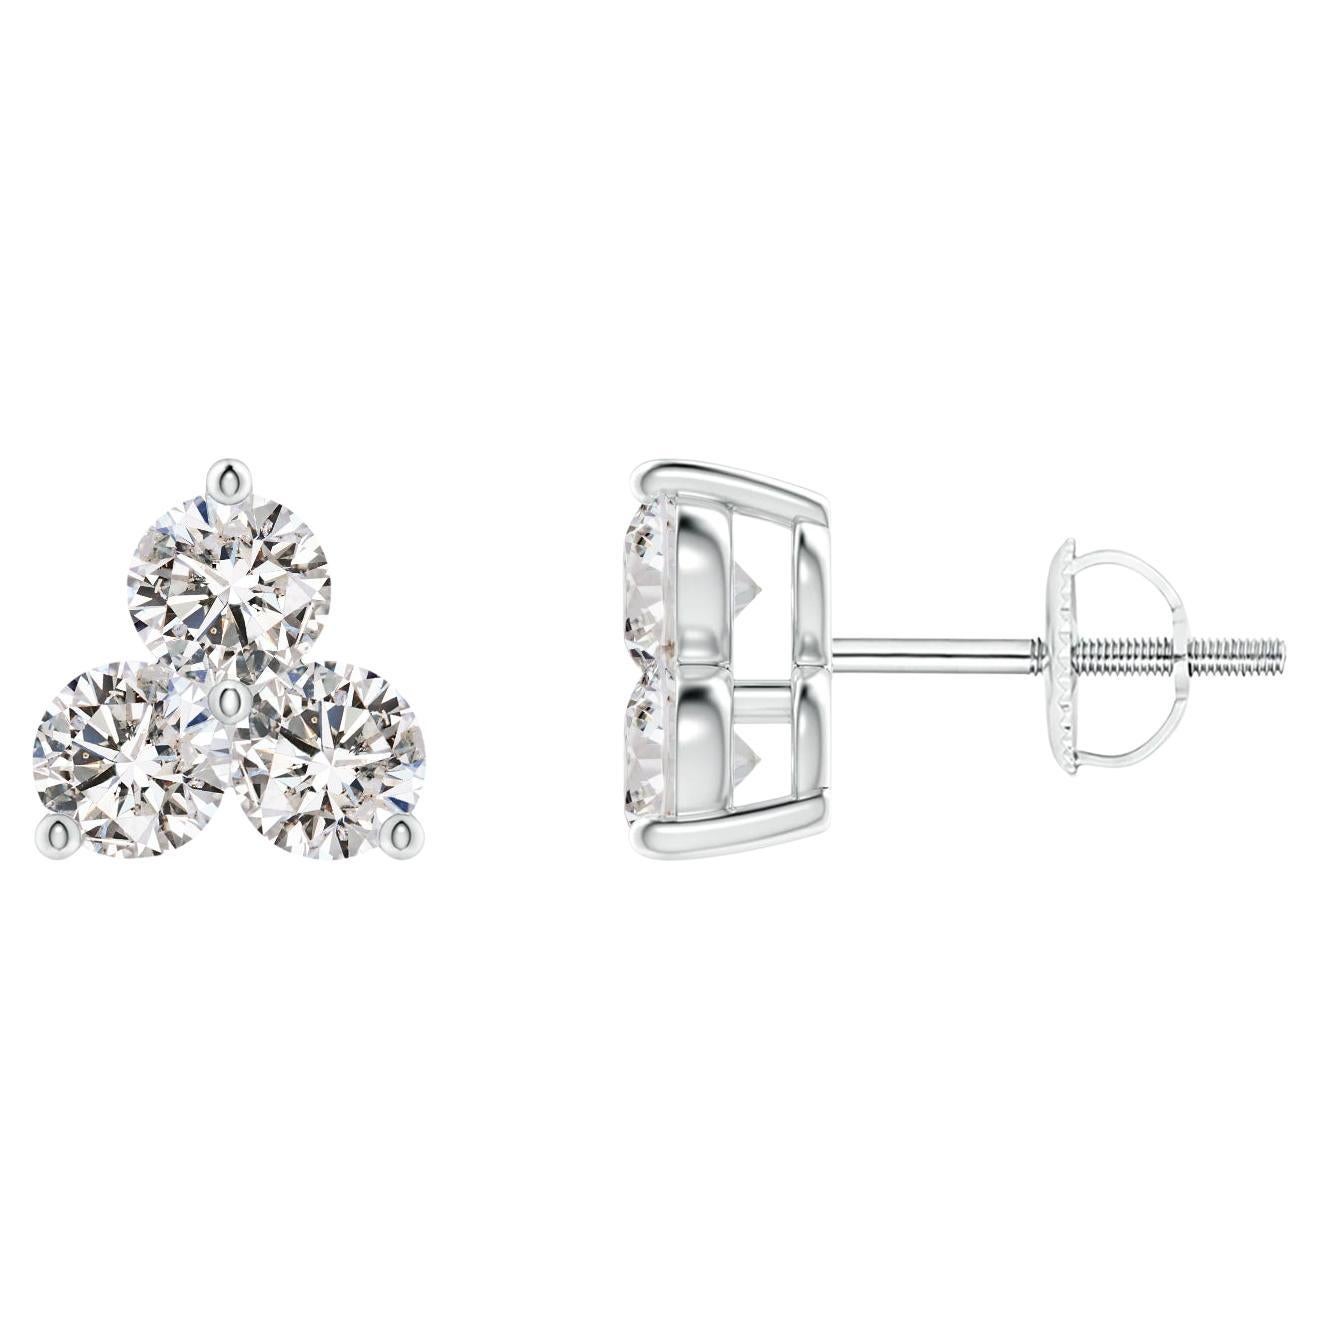 Natural Diamond Stud Earrings in Platinum (0.5cttw  Color-I-J  Clarity-I1-I2)